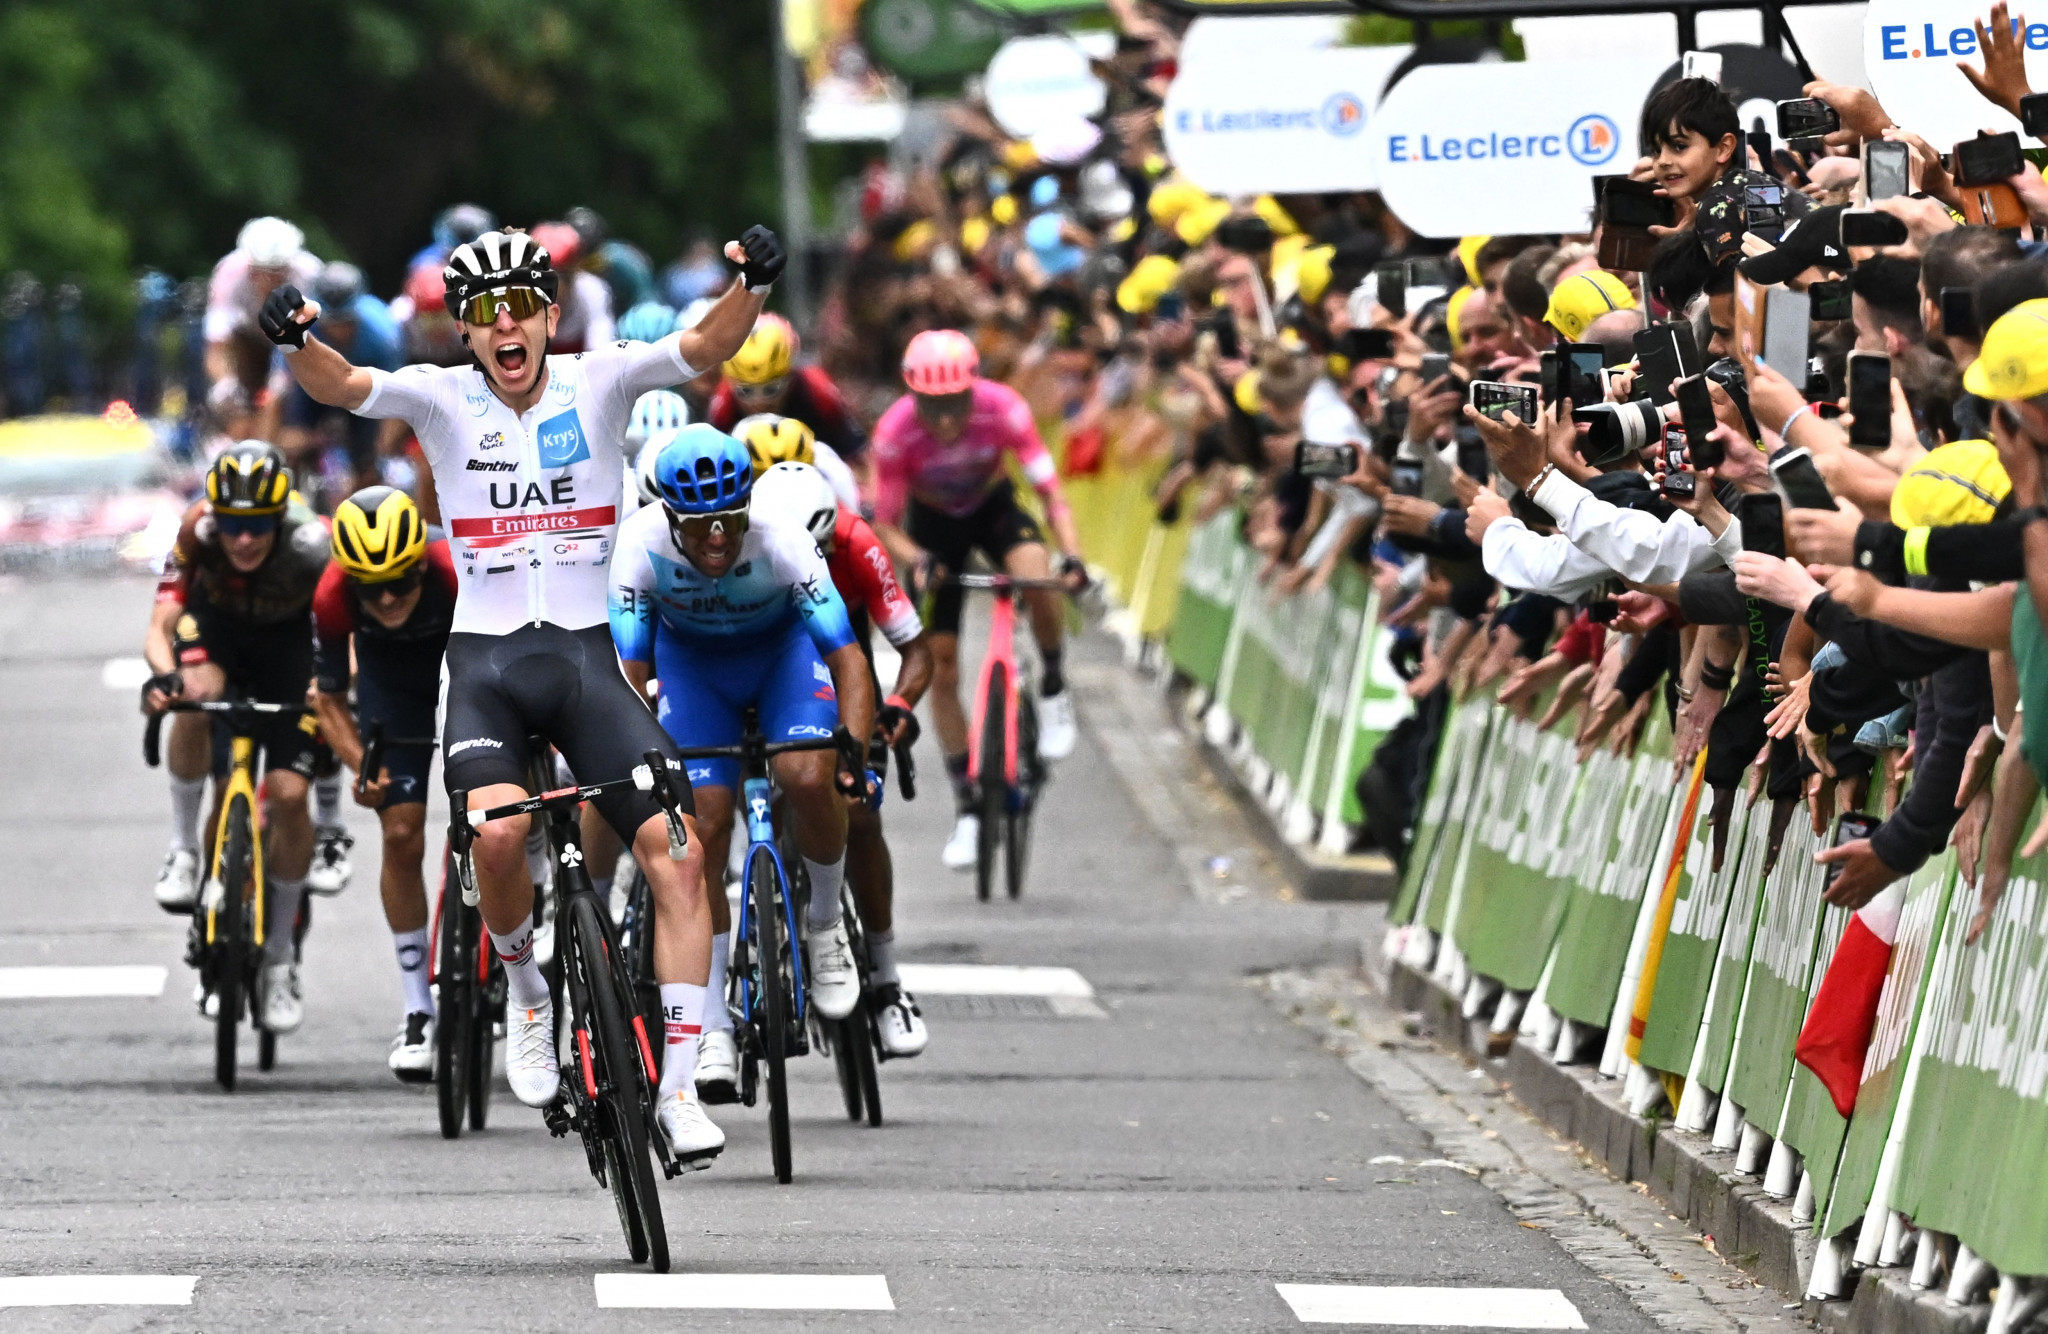 Defending champion Pogačar takes overall Tour de France lead after stage six win